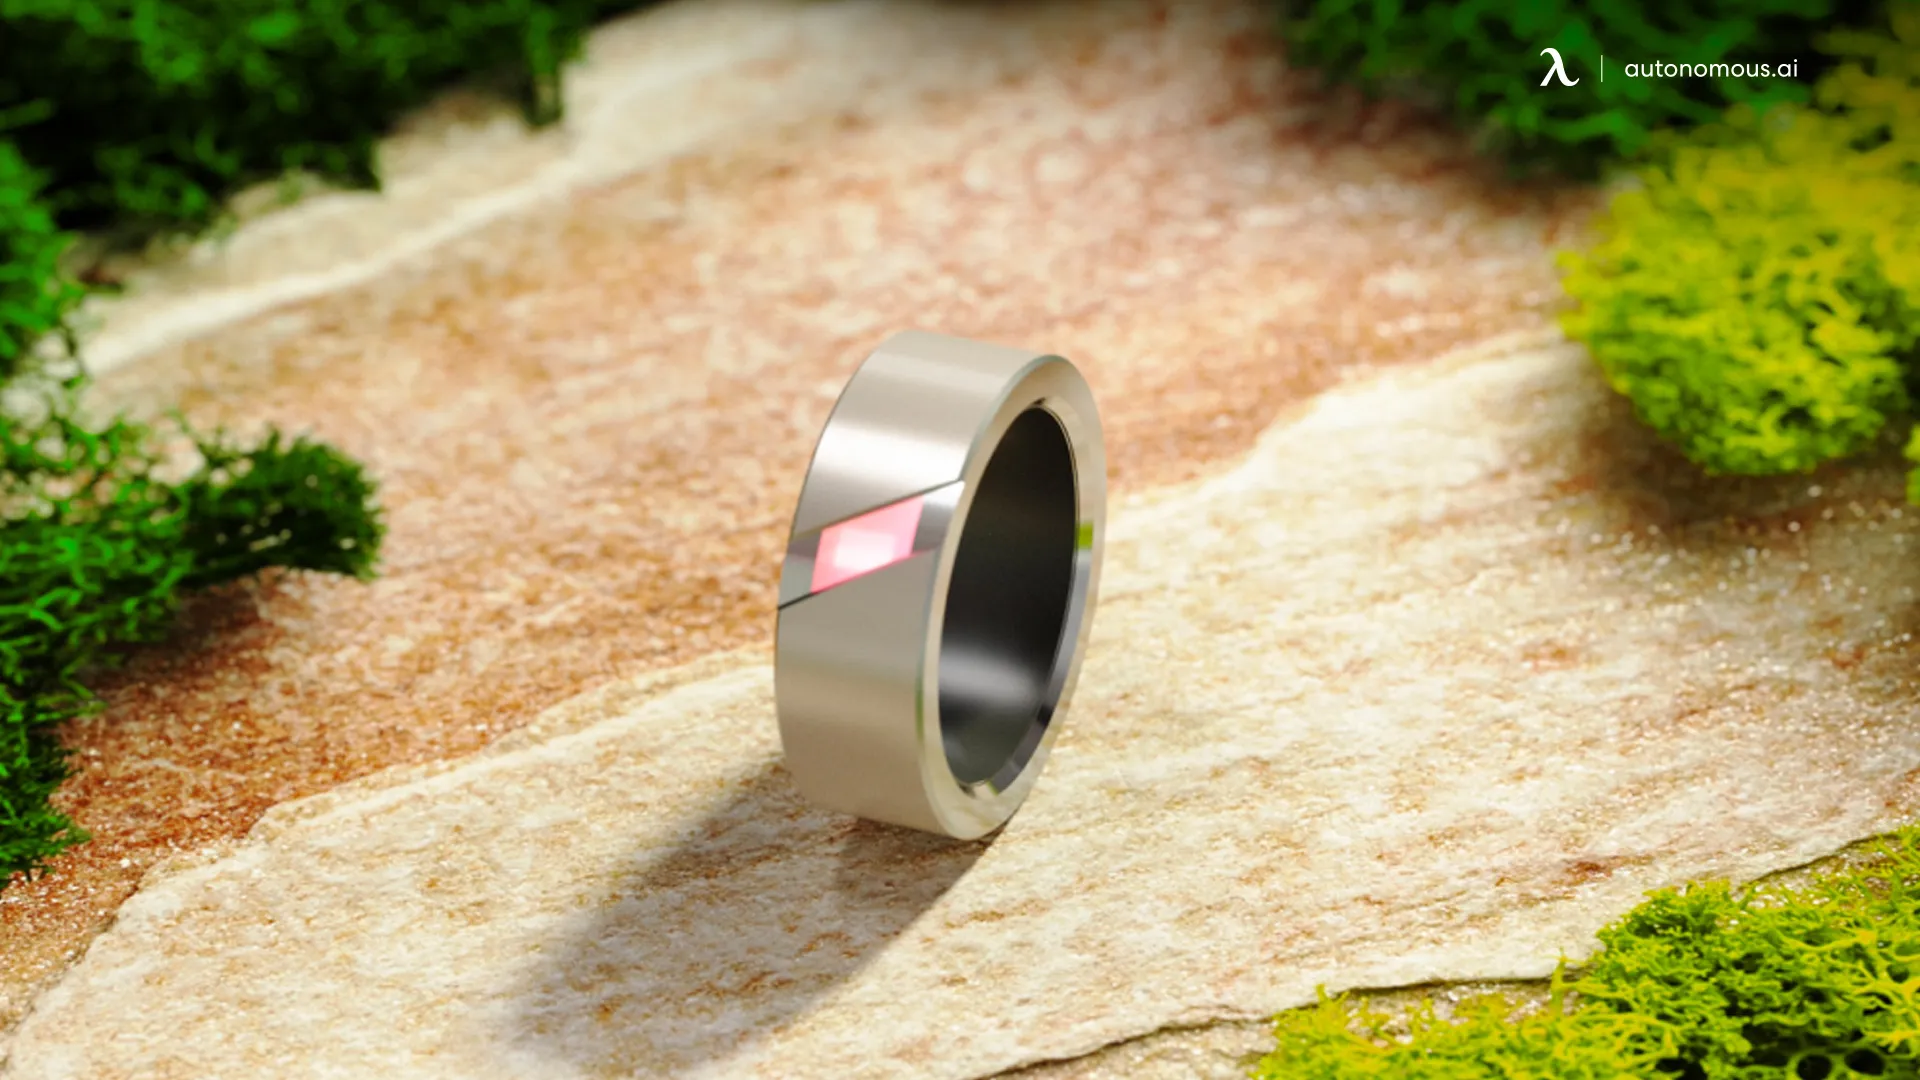 Autonomous 𝛌 Ring - Bring Action to Your Life